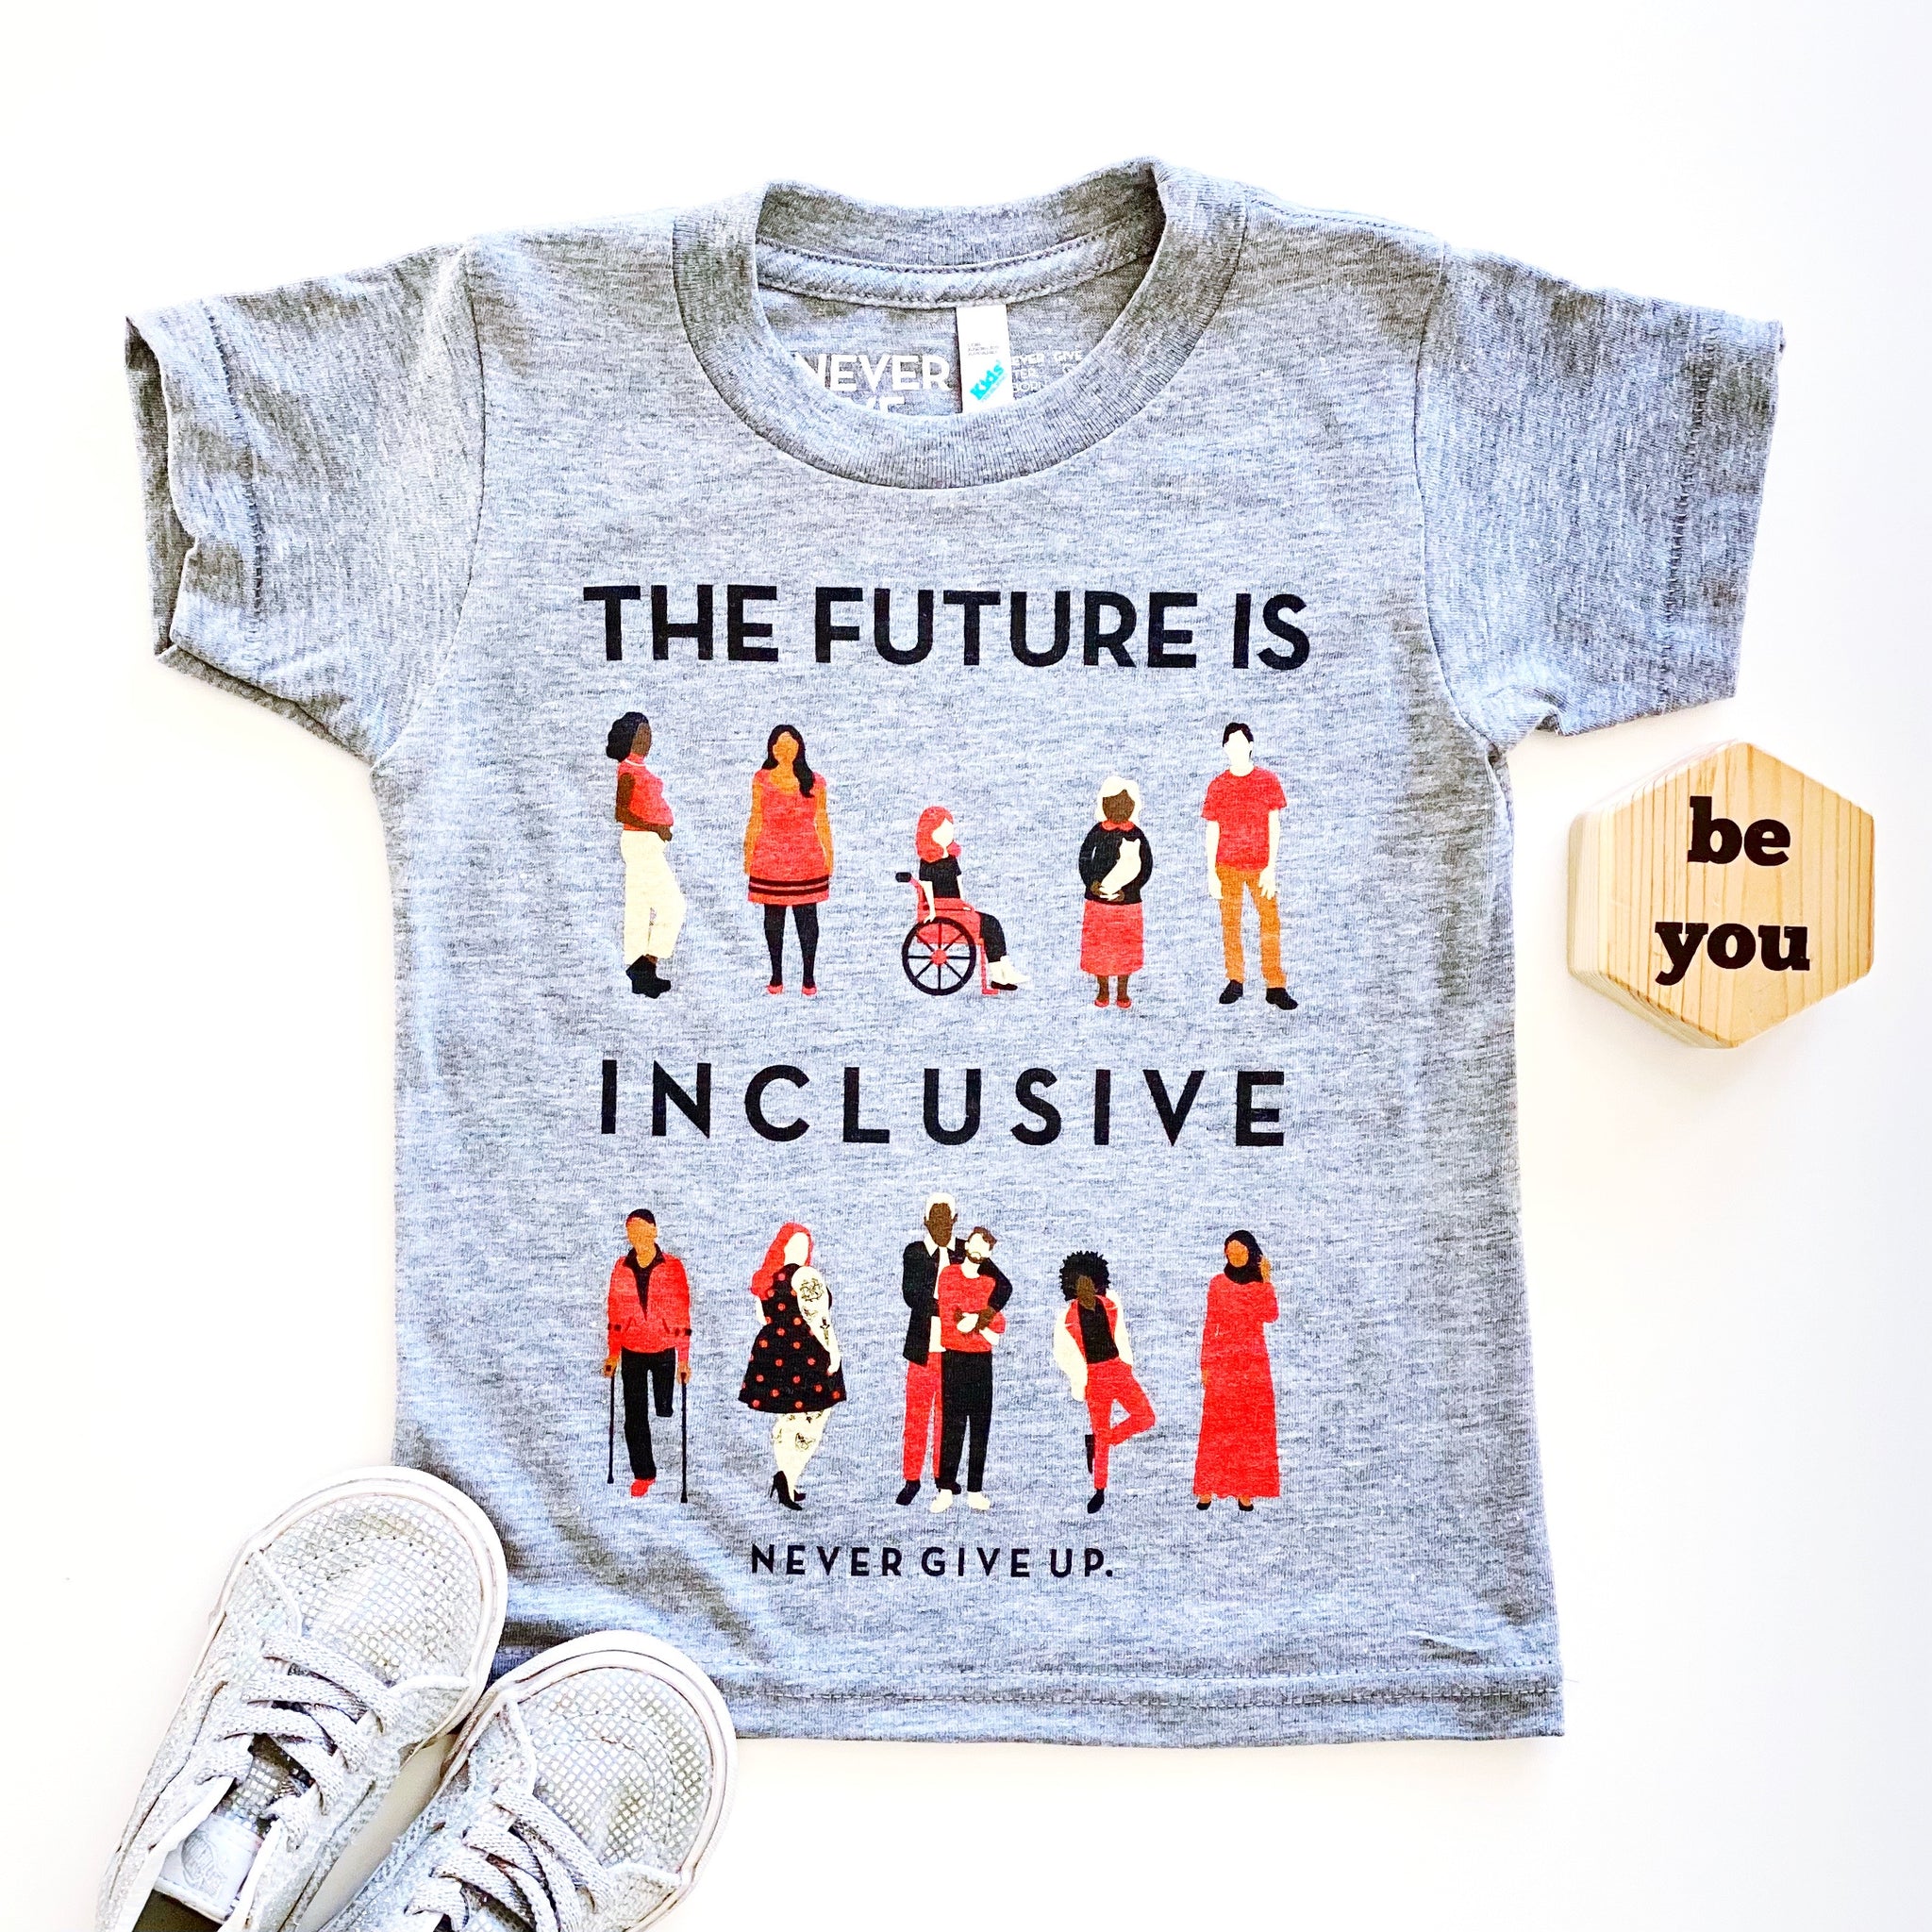 GIVE INCLUSIVE UP. NEVER IS FUTURE SHOP - THE